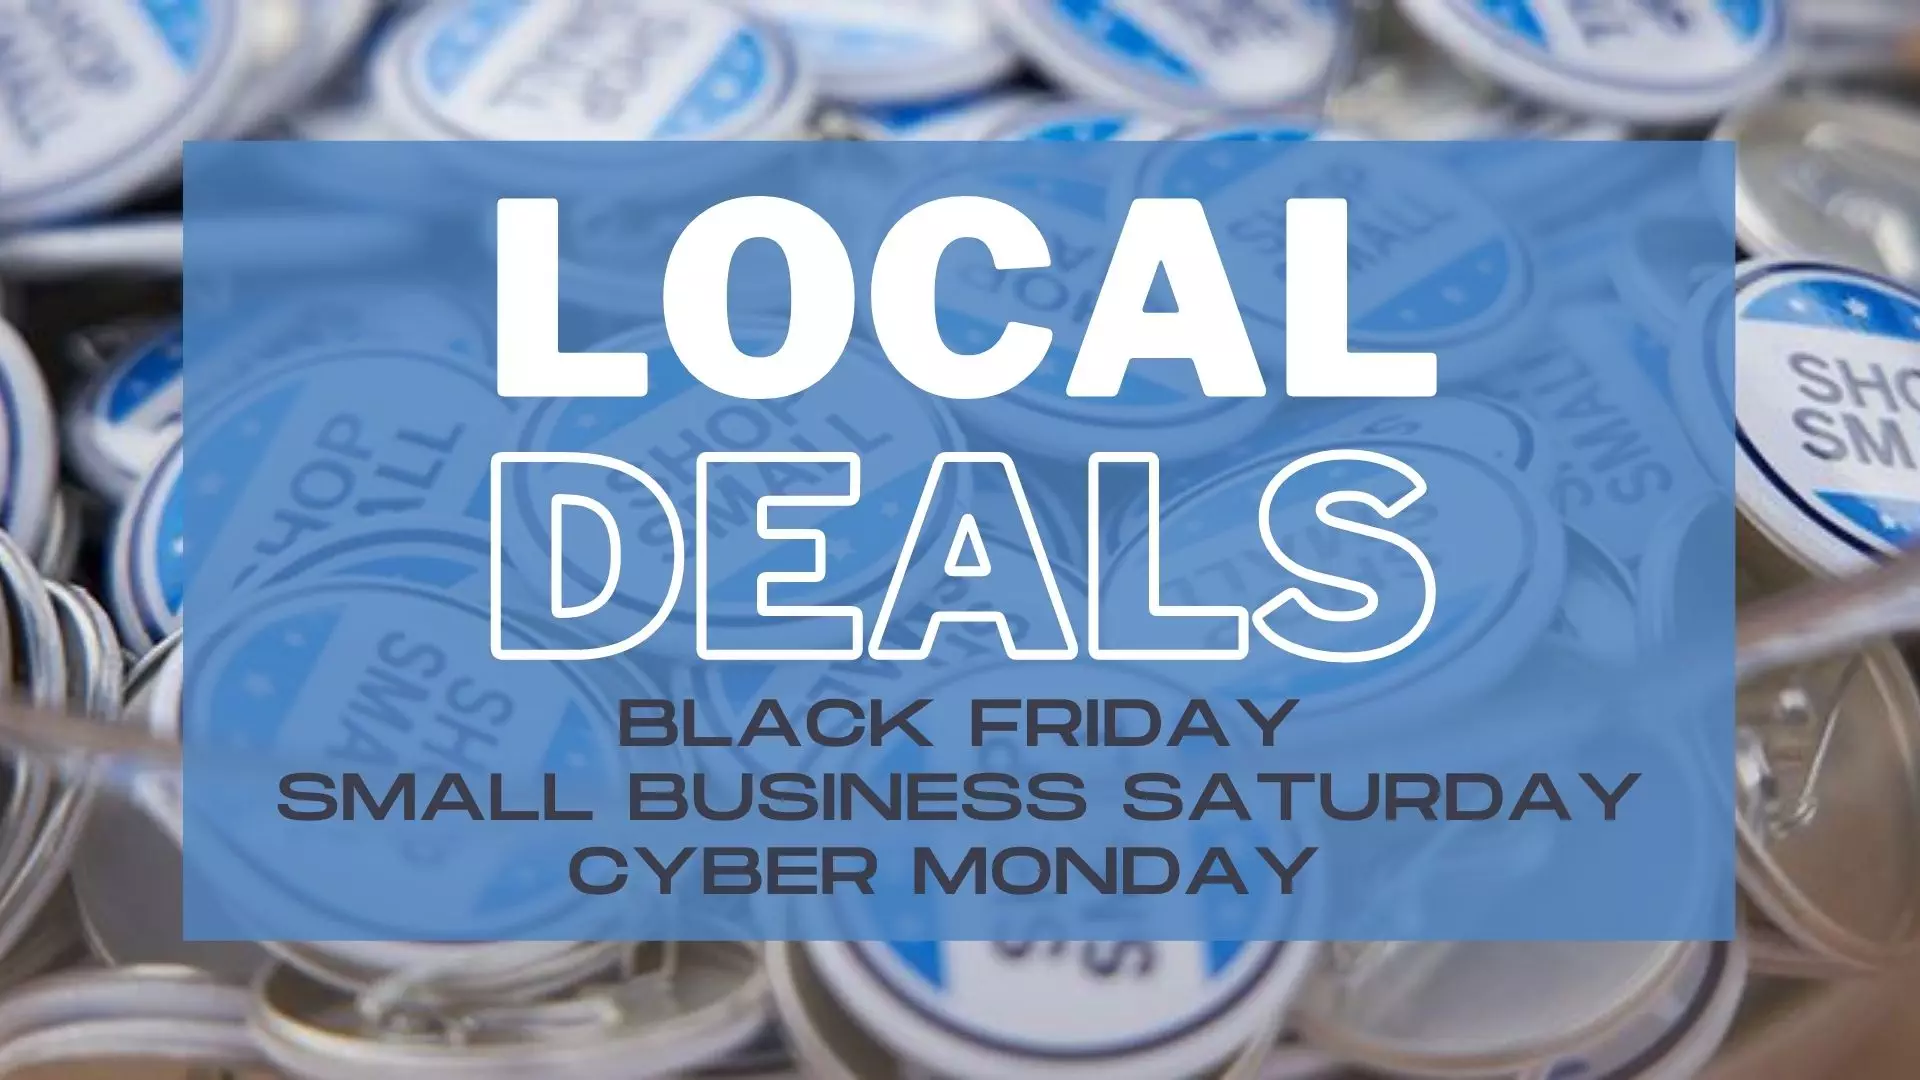 LOCAL Black Friday, Small Business Saturday, Cyber Monday Deals in Raleigh